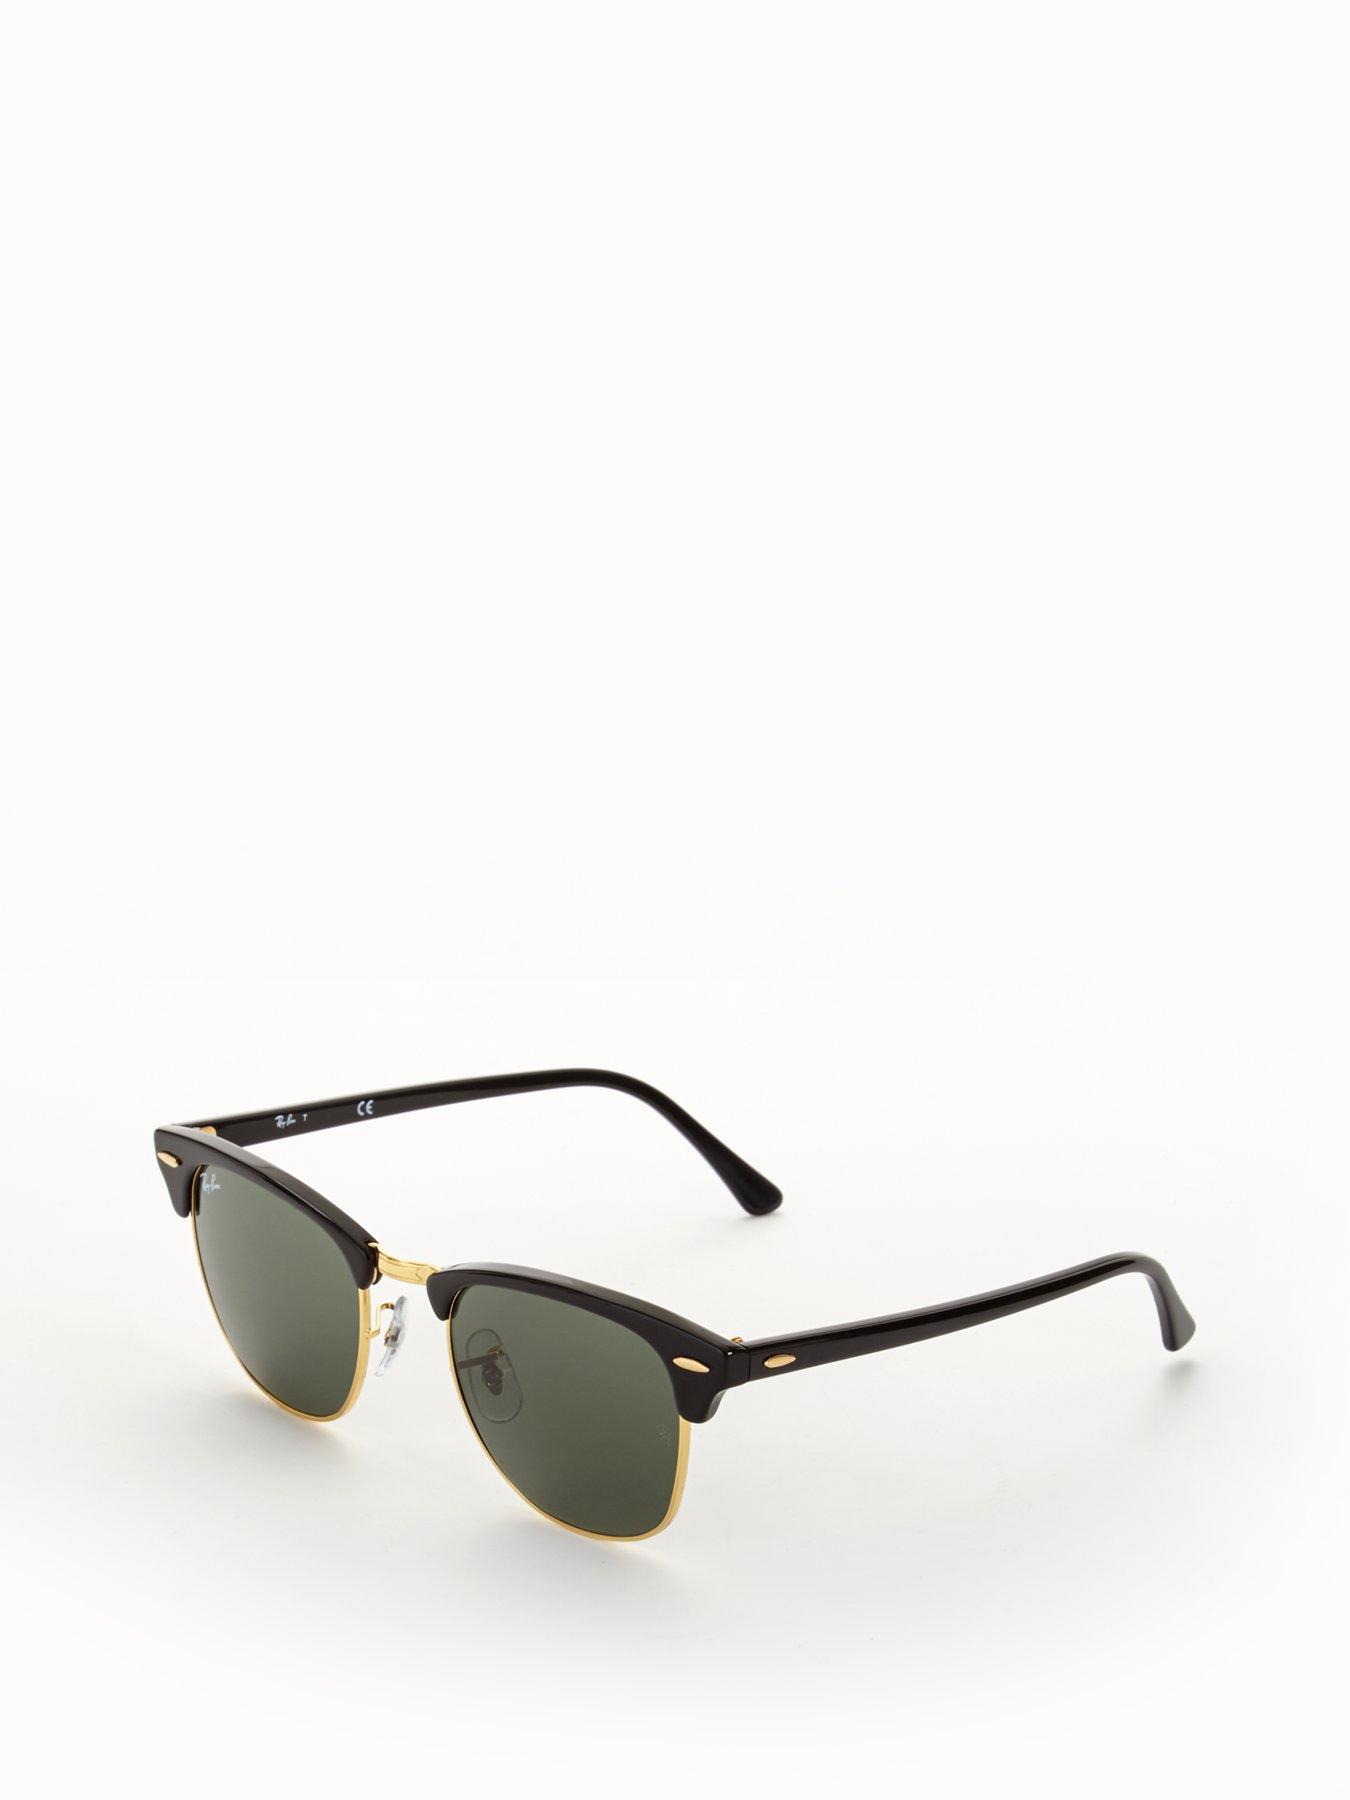 buy ray ban clubmaster sunglasses